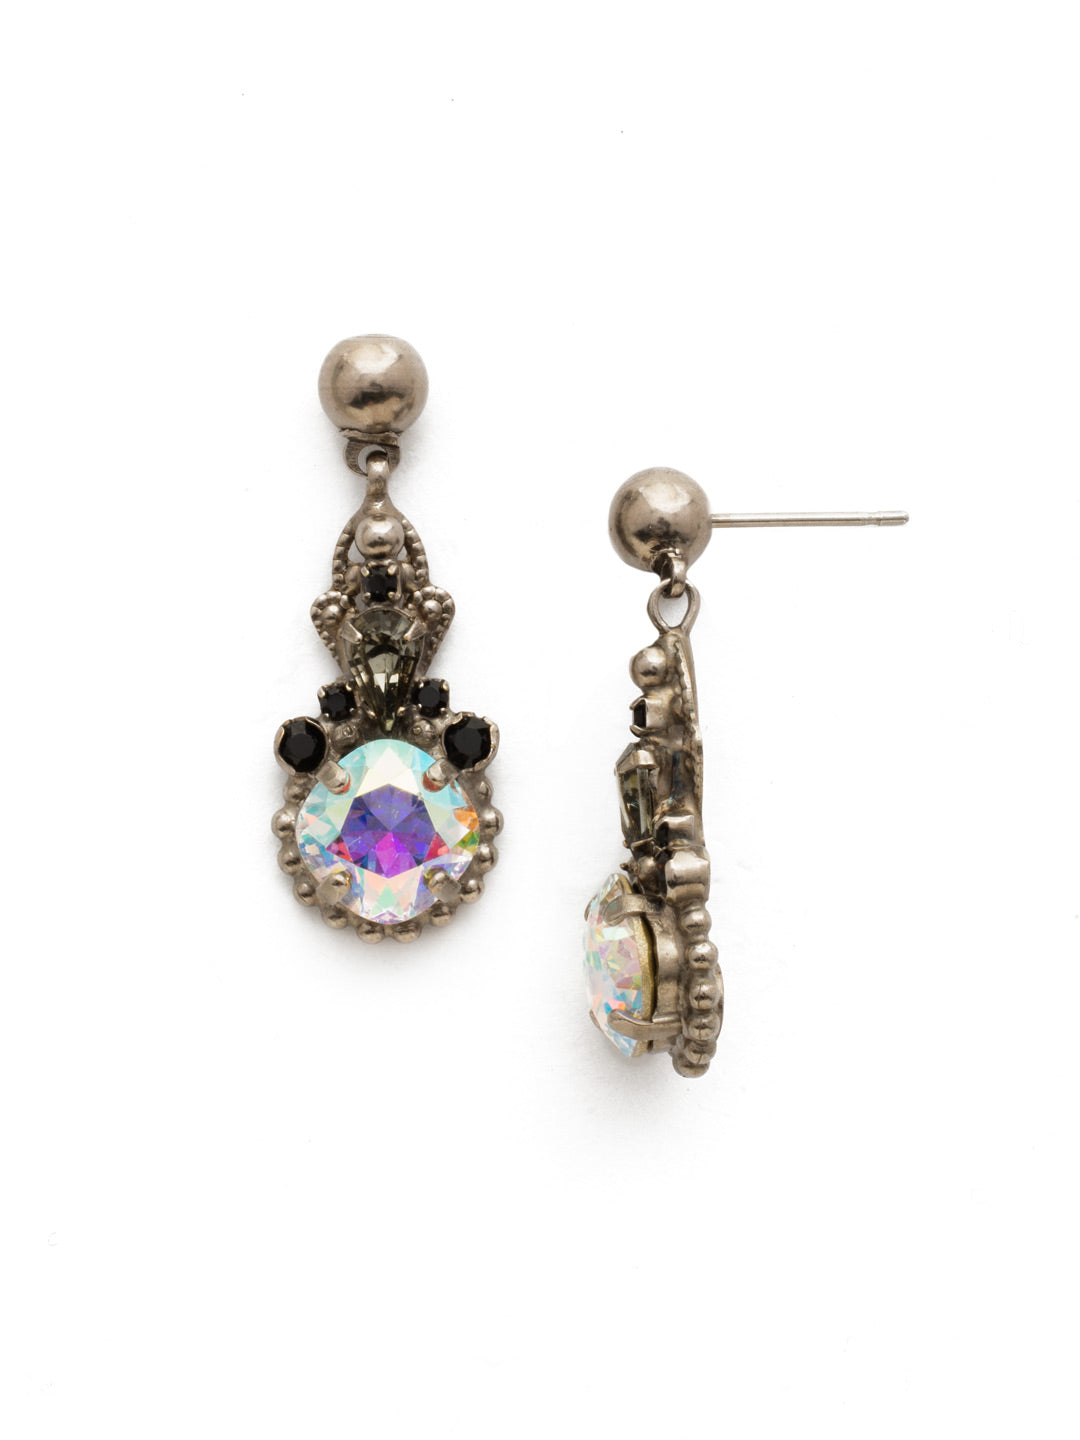 Elowen Earring - EDS3ASBLT - A petite drop with a central round cut crystal highlighted by an inverted pear and round cut stones. Delicate metal details give this earring its finishing touches. From Sorrelli's Black Tie collection in our Antique Silver-tone finish.